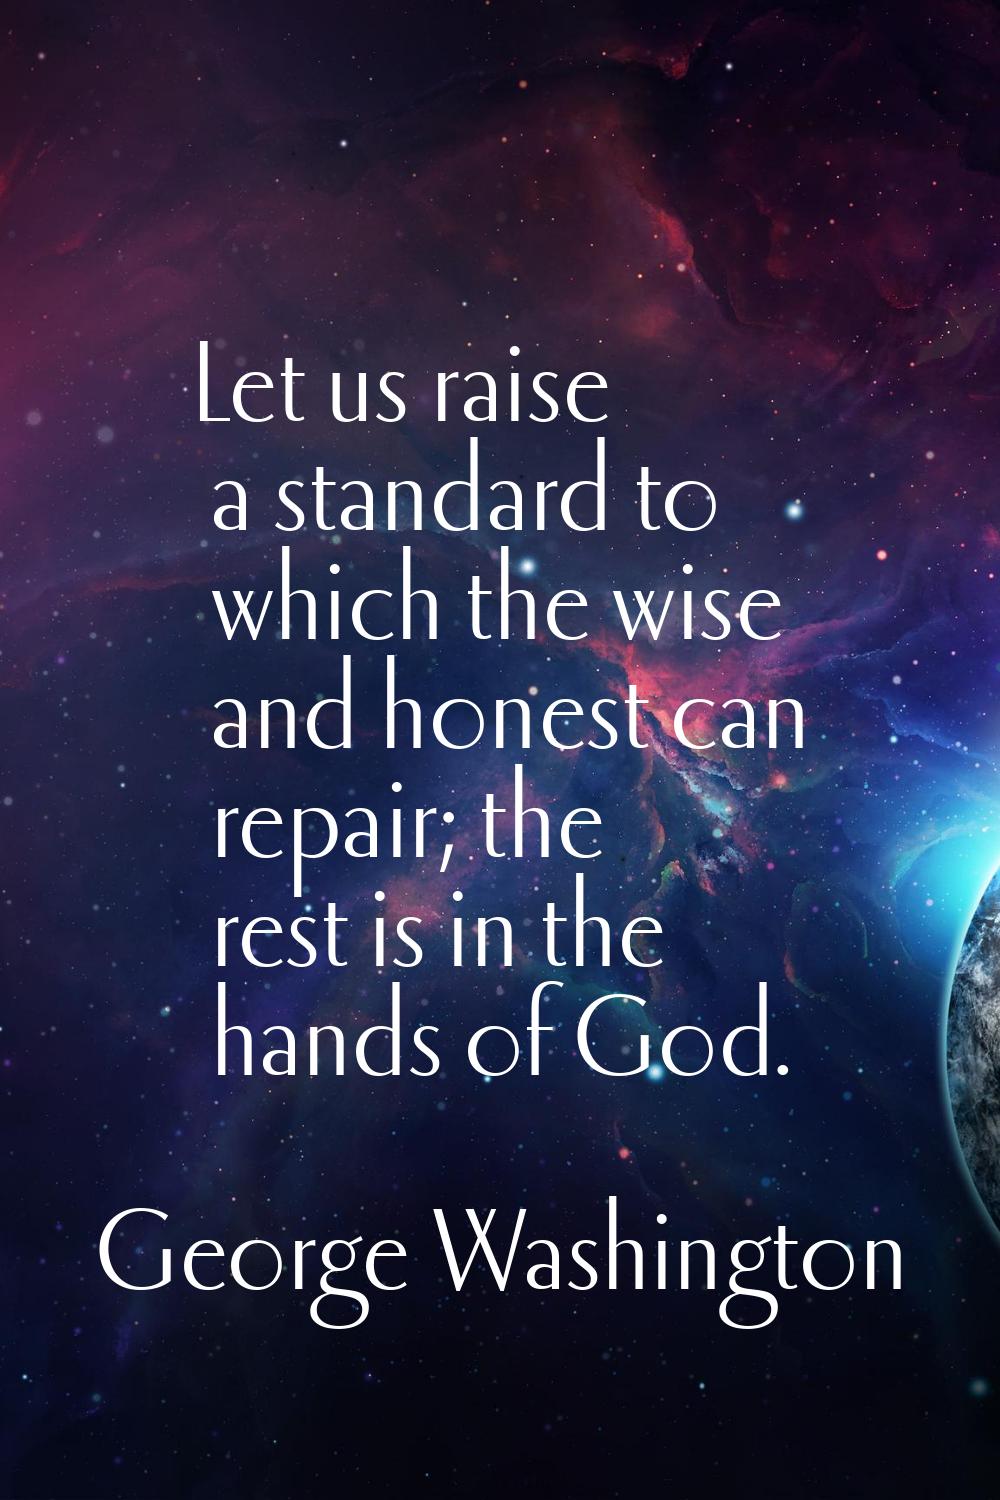 Let us raise a standard to which the wise and honest can repair; the rest is in the hands of God.